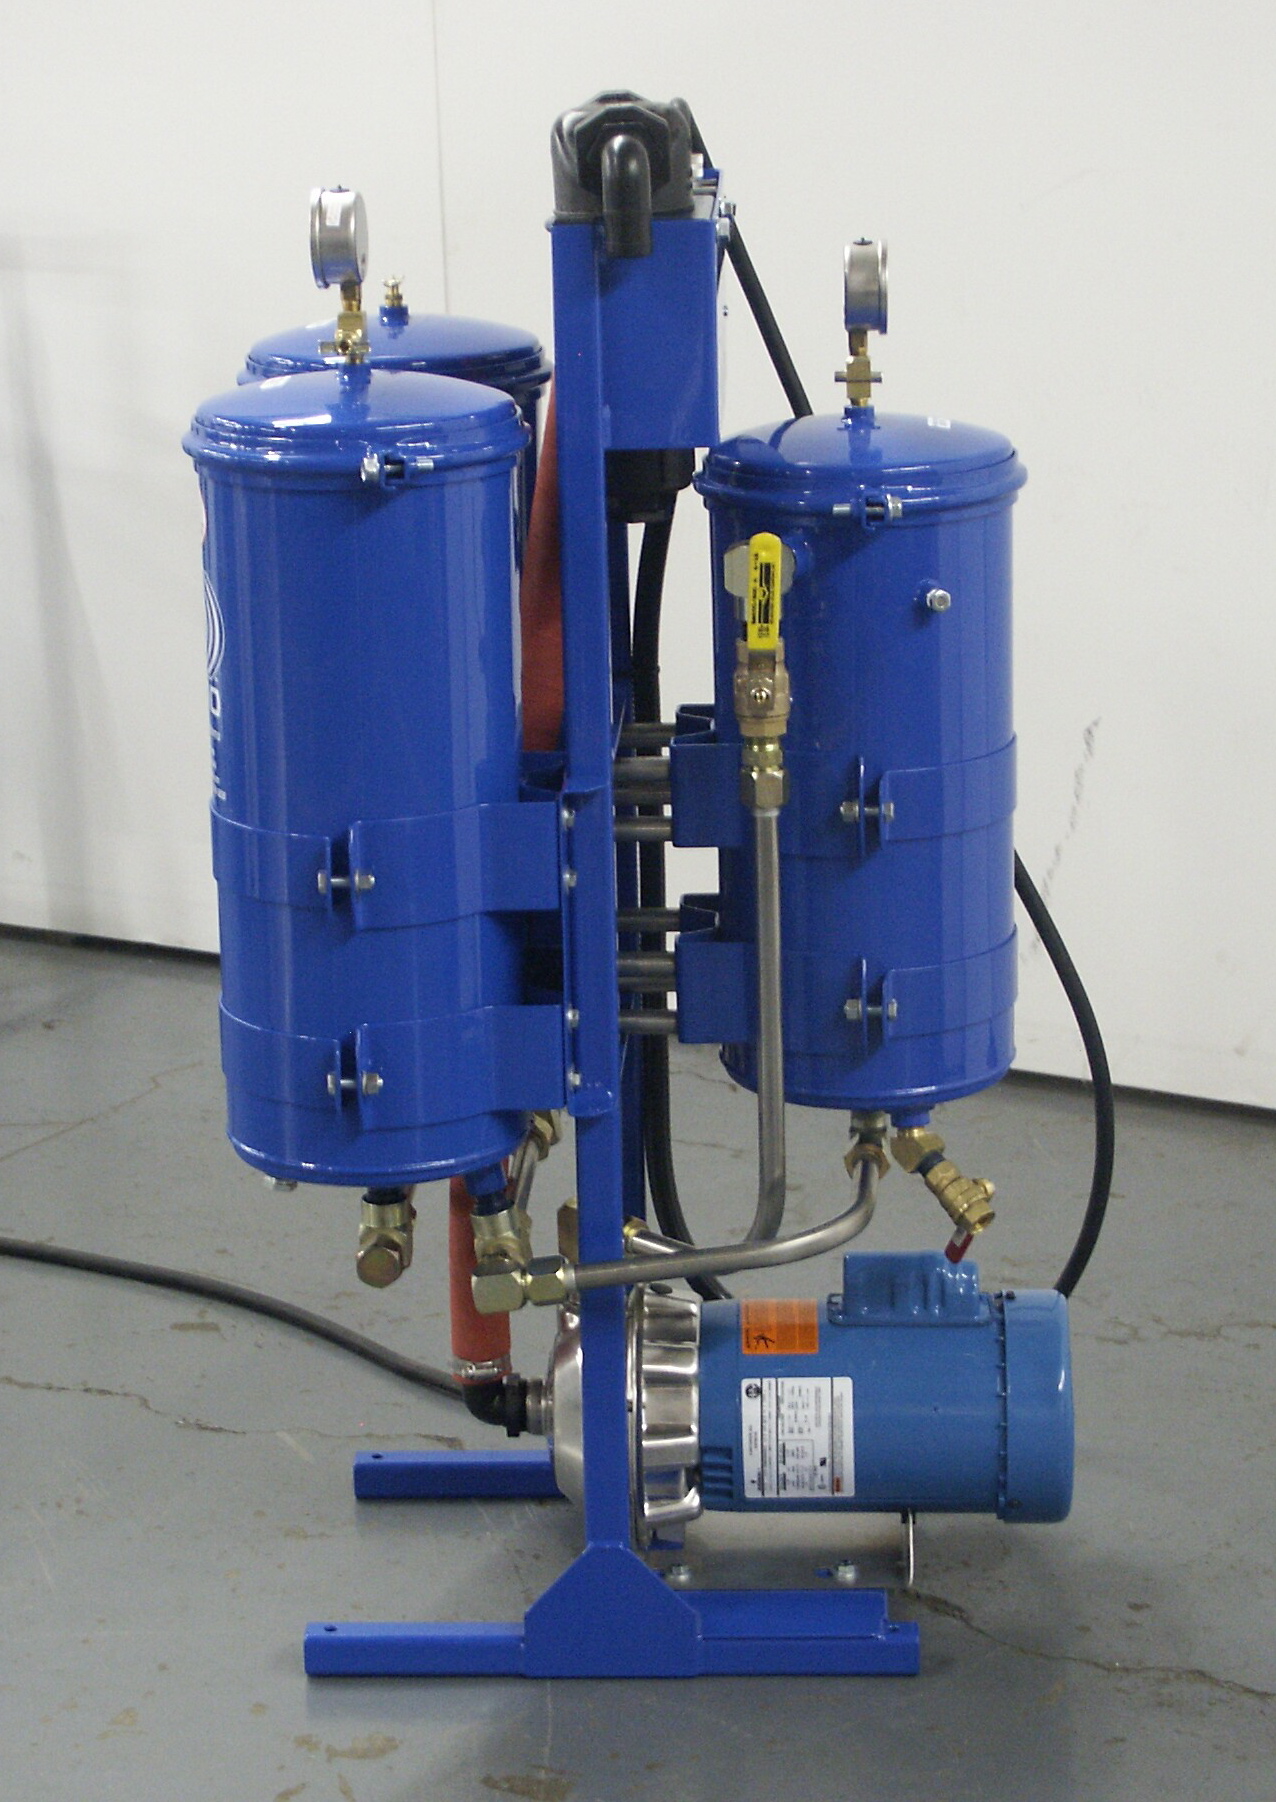 Additional product image of our Dedicated Oil Filtration Systems.